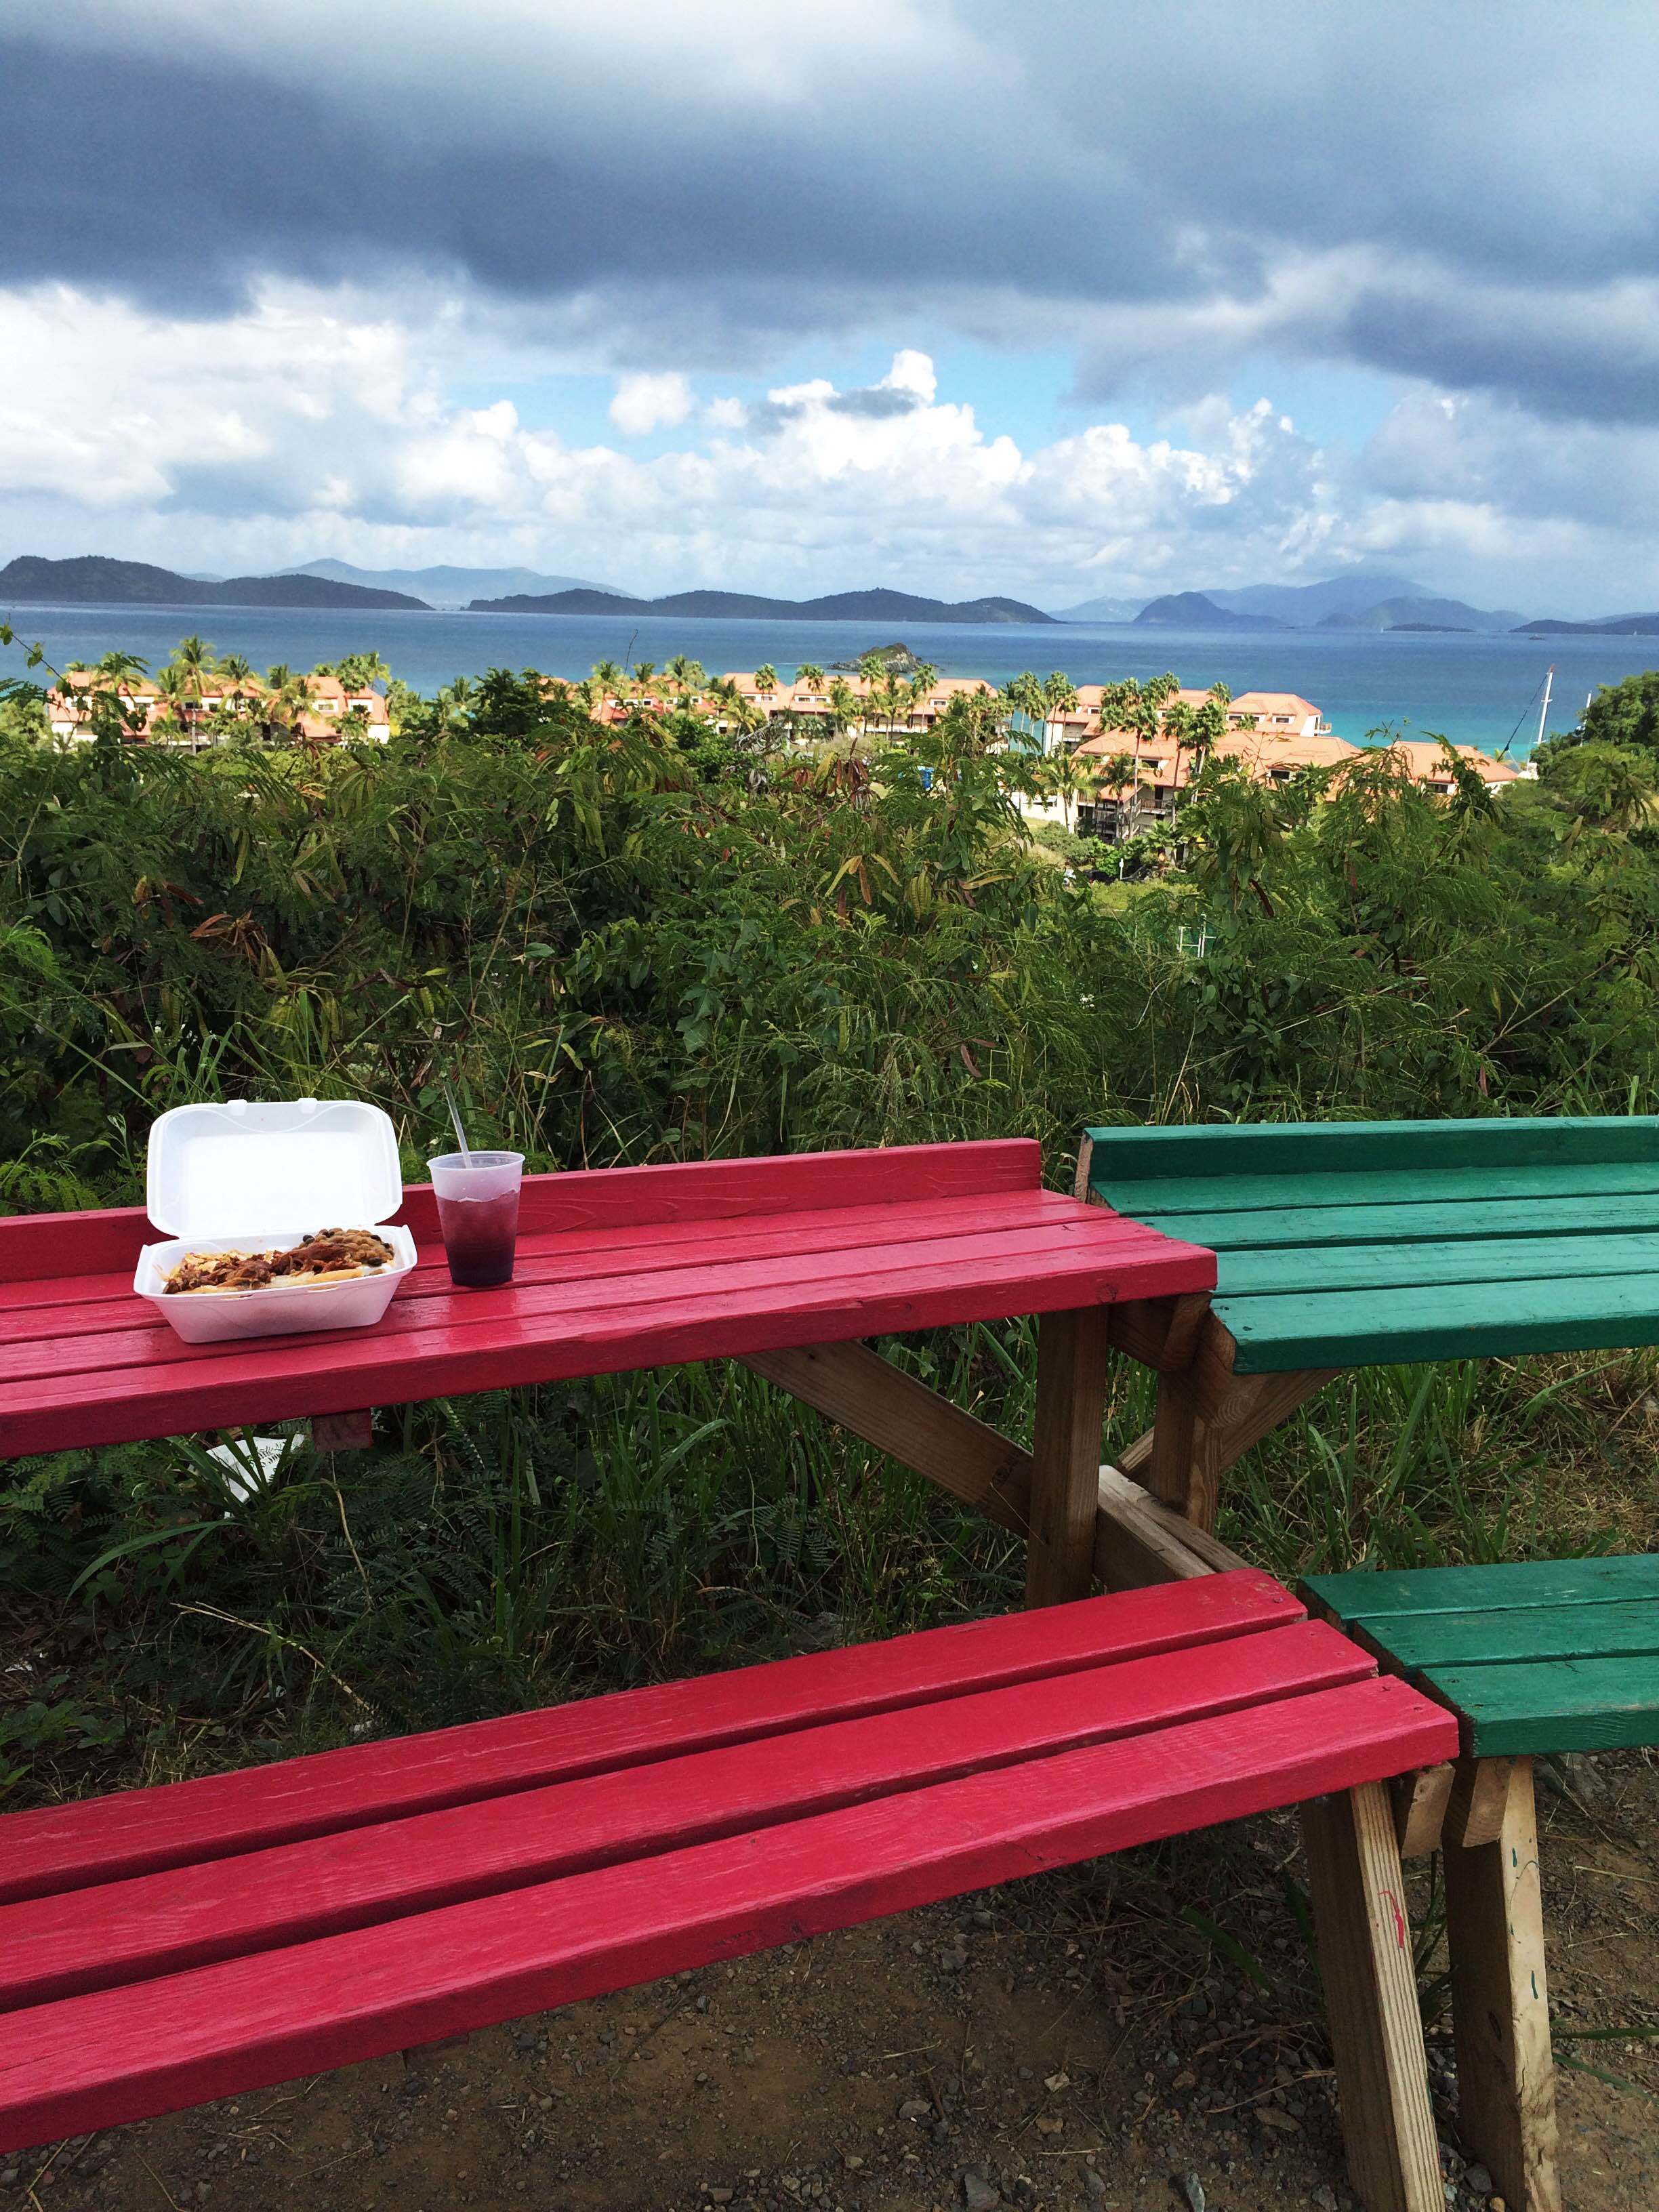 Lunch with a View, St. Thomas - USVI Travelogue {Katie at the Kitchen Door}